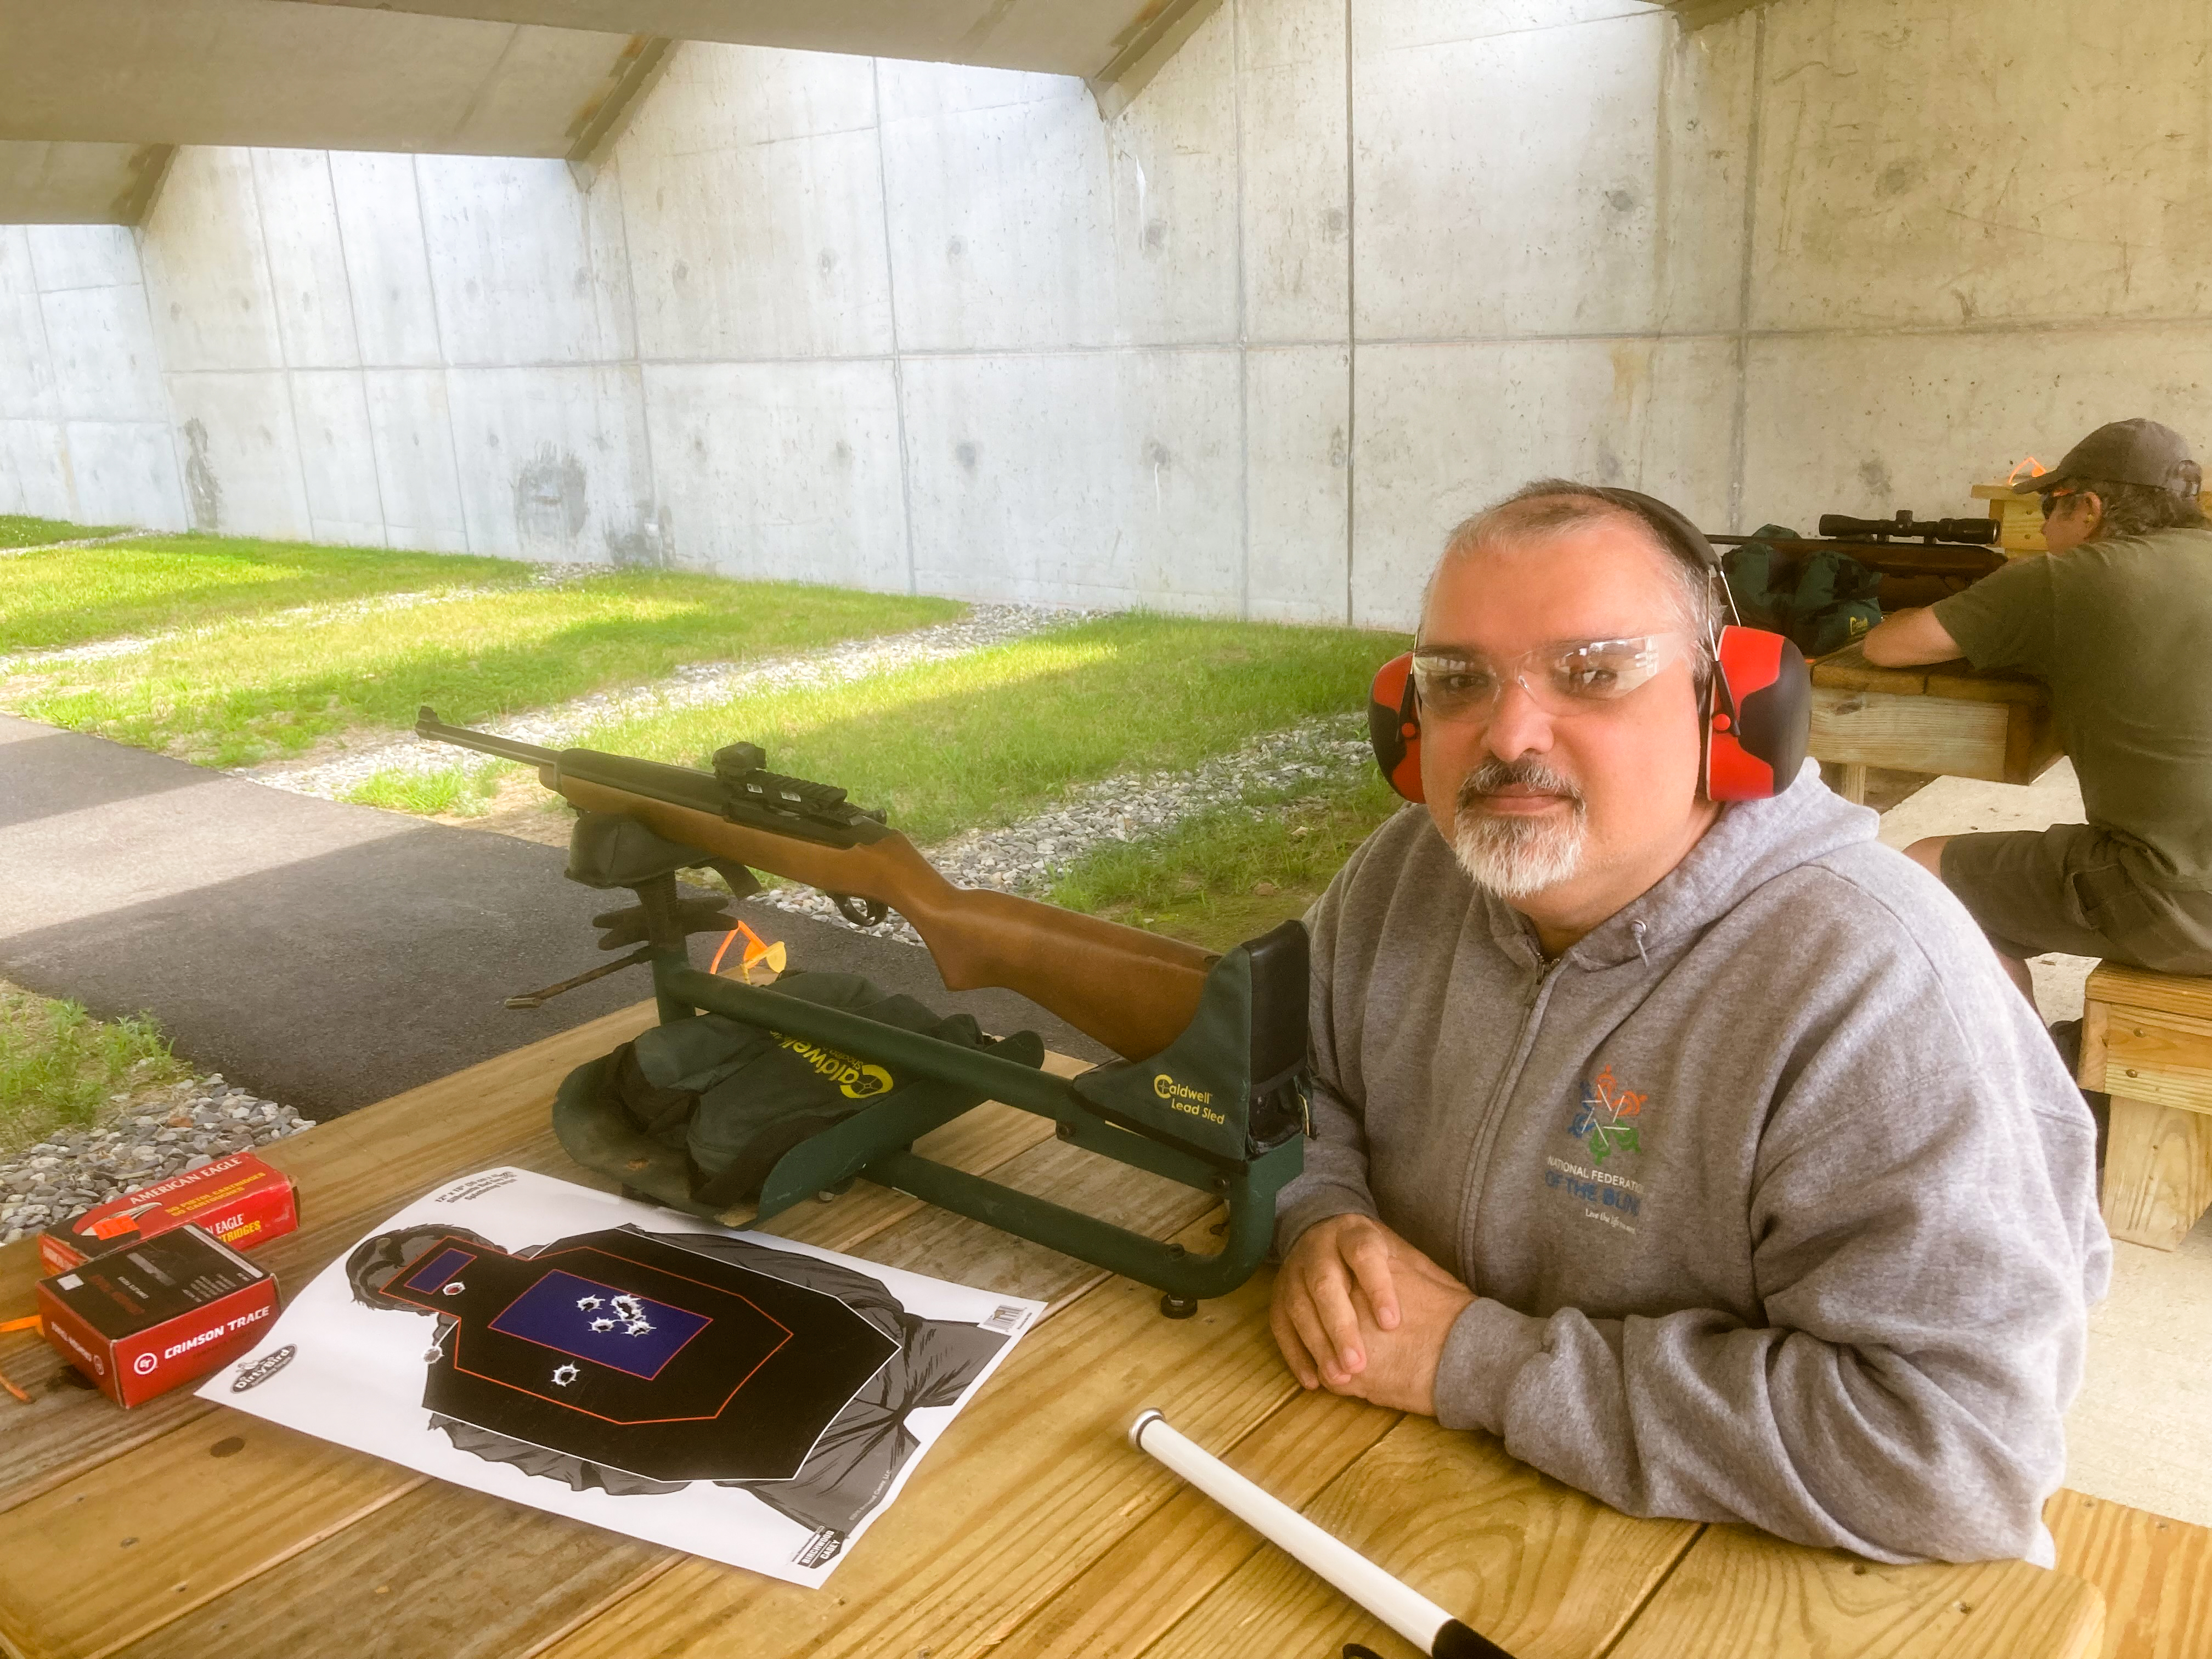 Leon Proctor at the shooting range